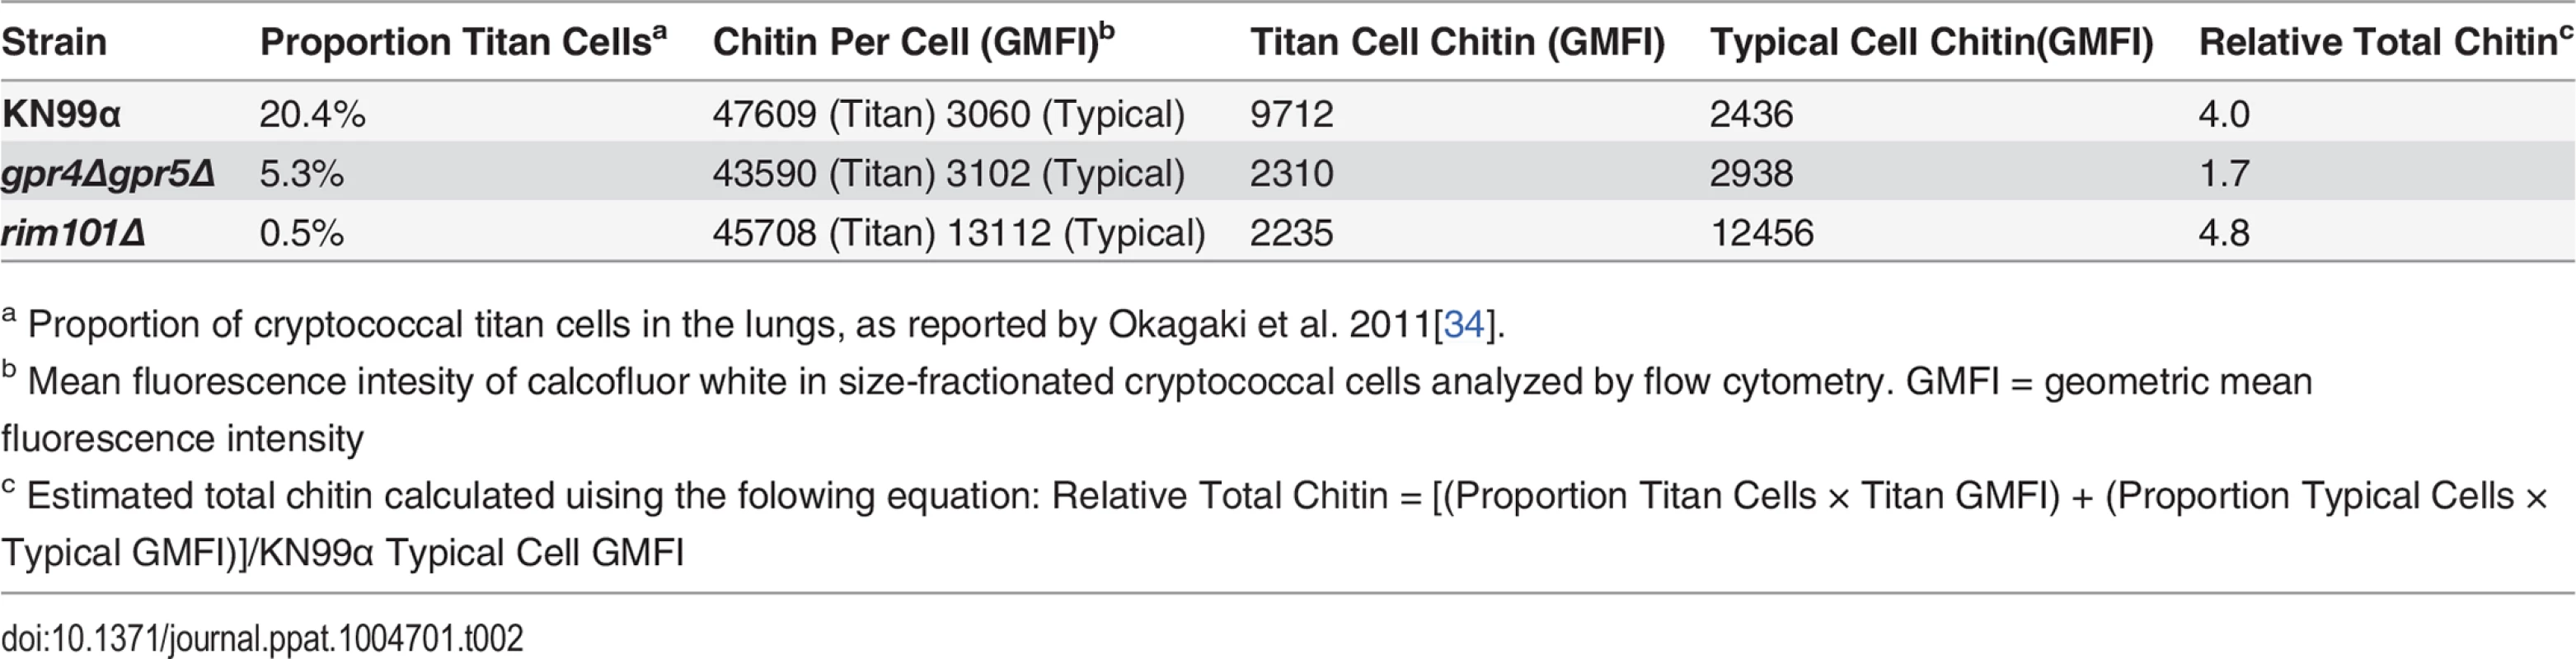 Differences in total chitin due to cell morphology.